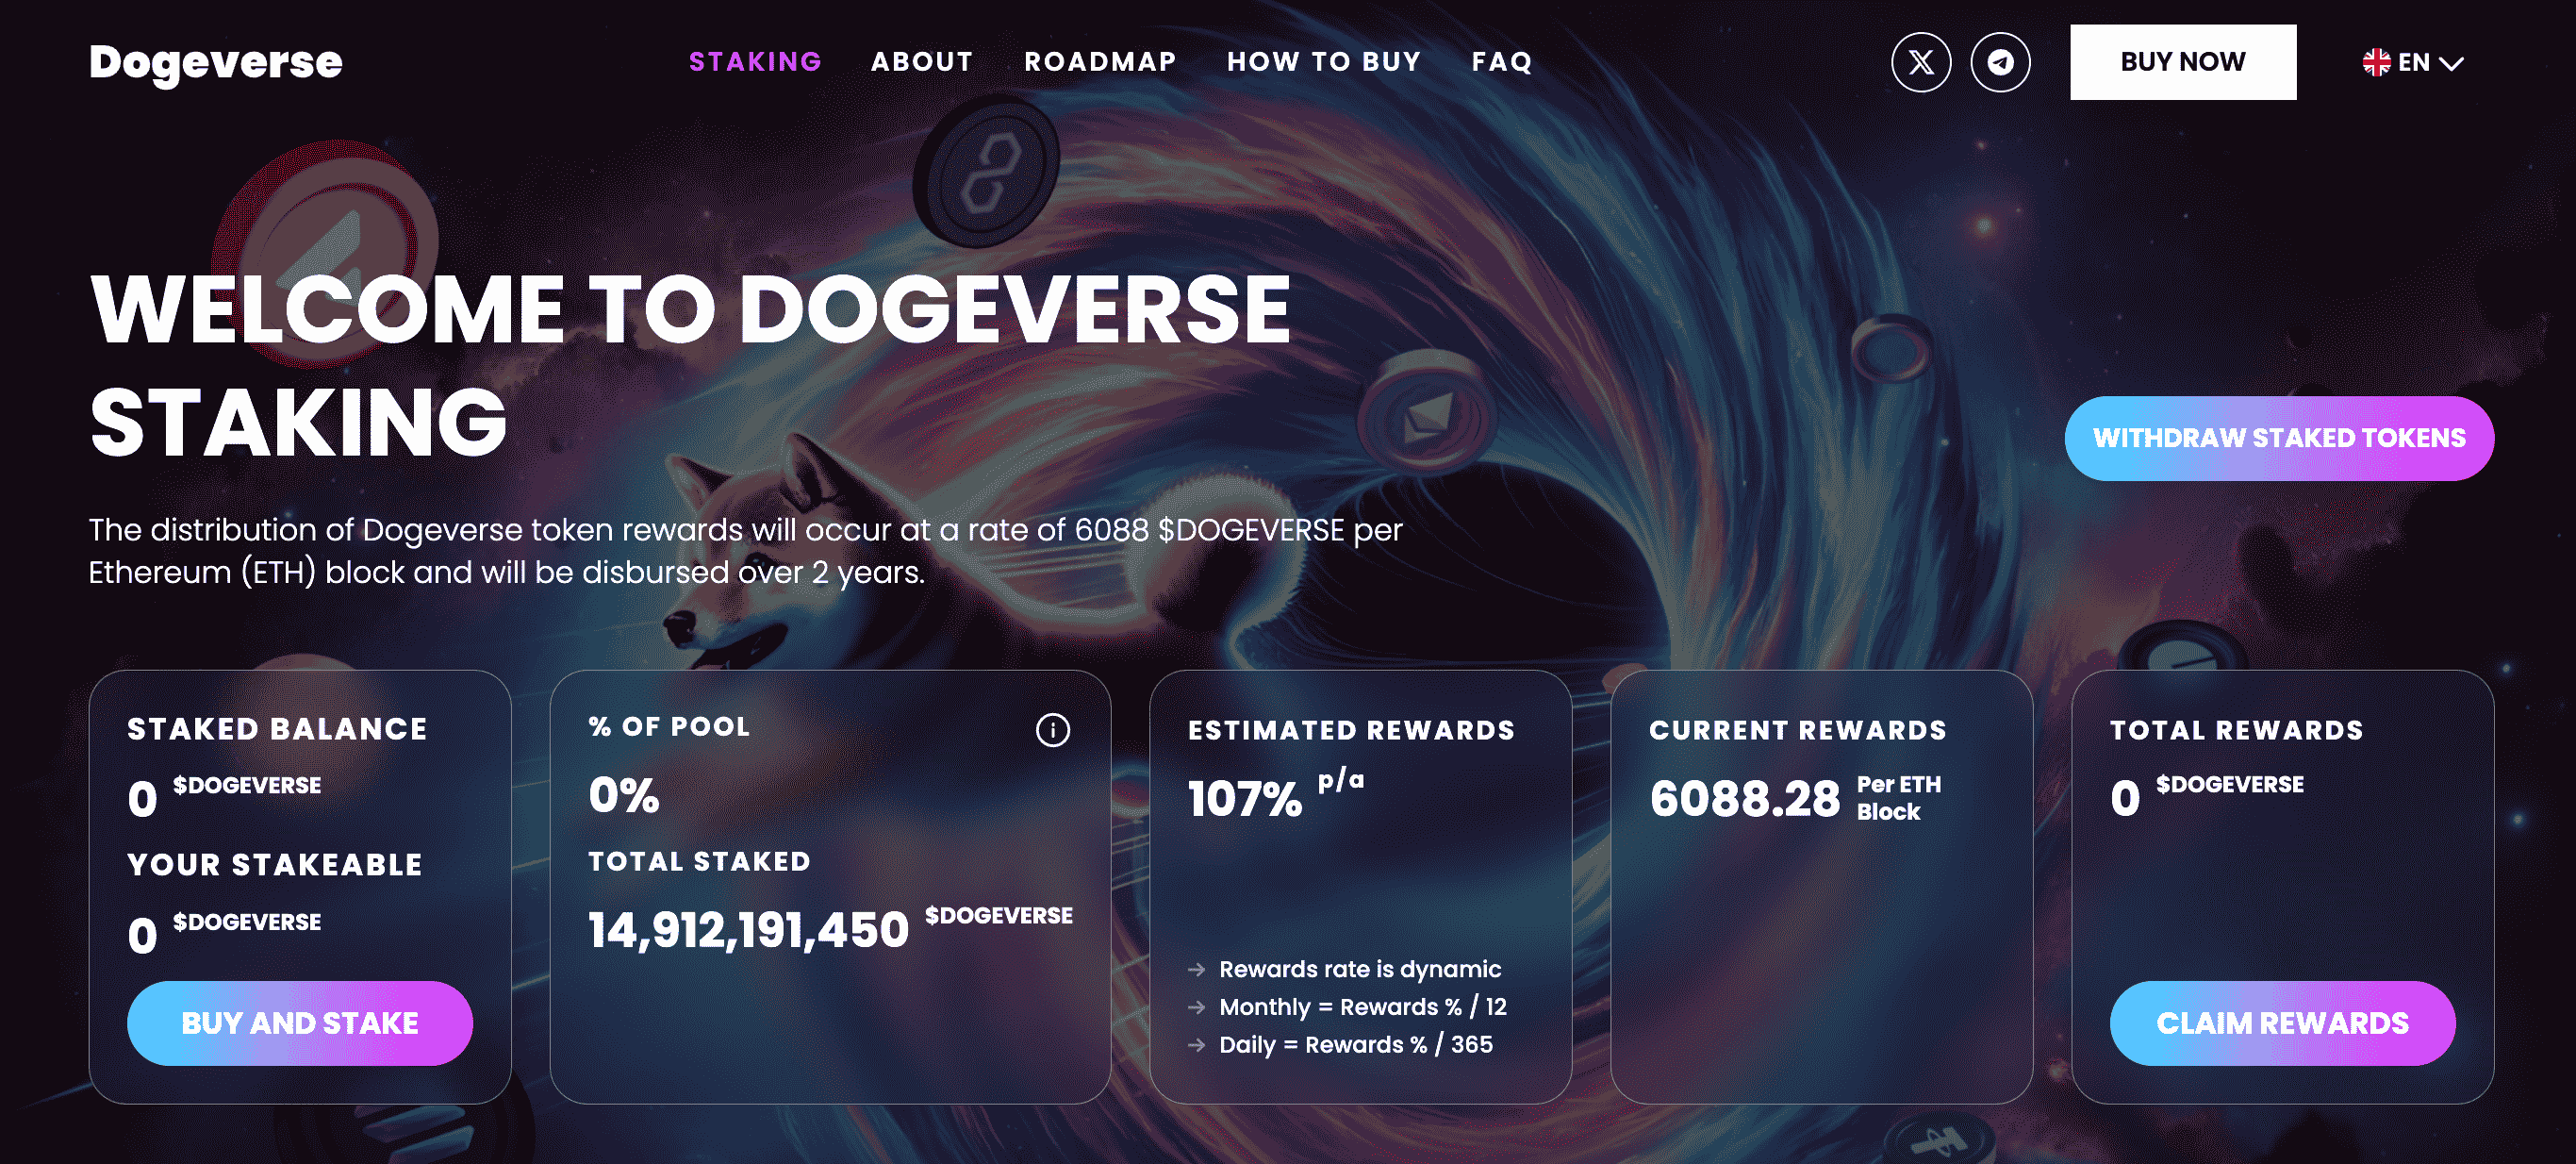 Dogeverse staking